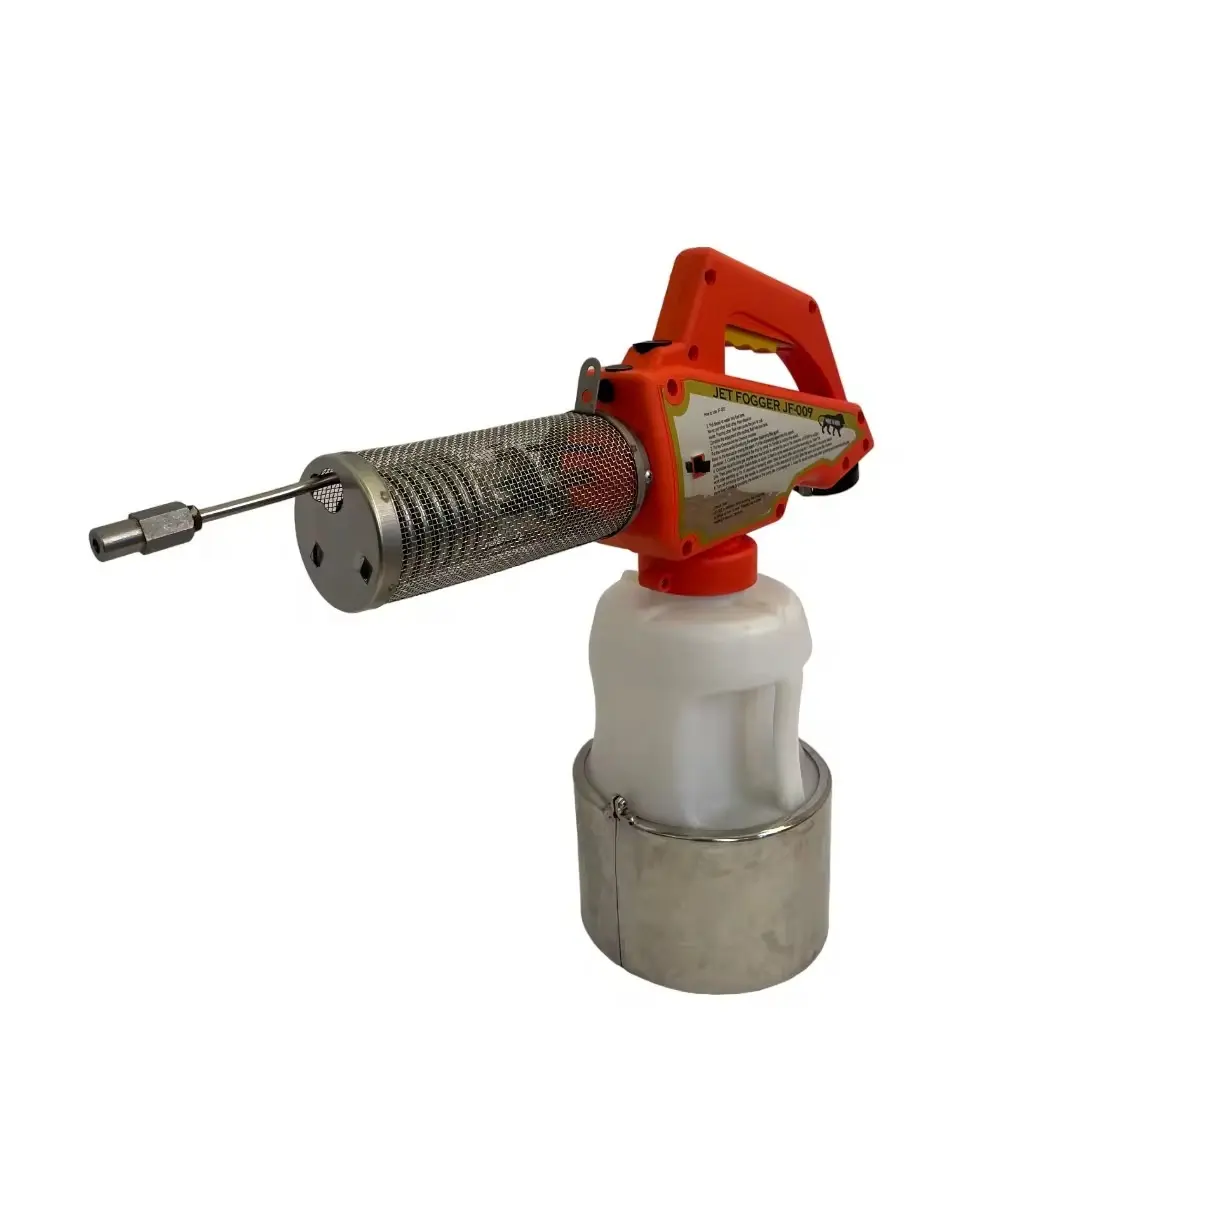 Export Selling Home and Garden Supplies Thermal Fogger Sprayer Available at Affordable Price from India